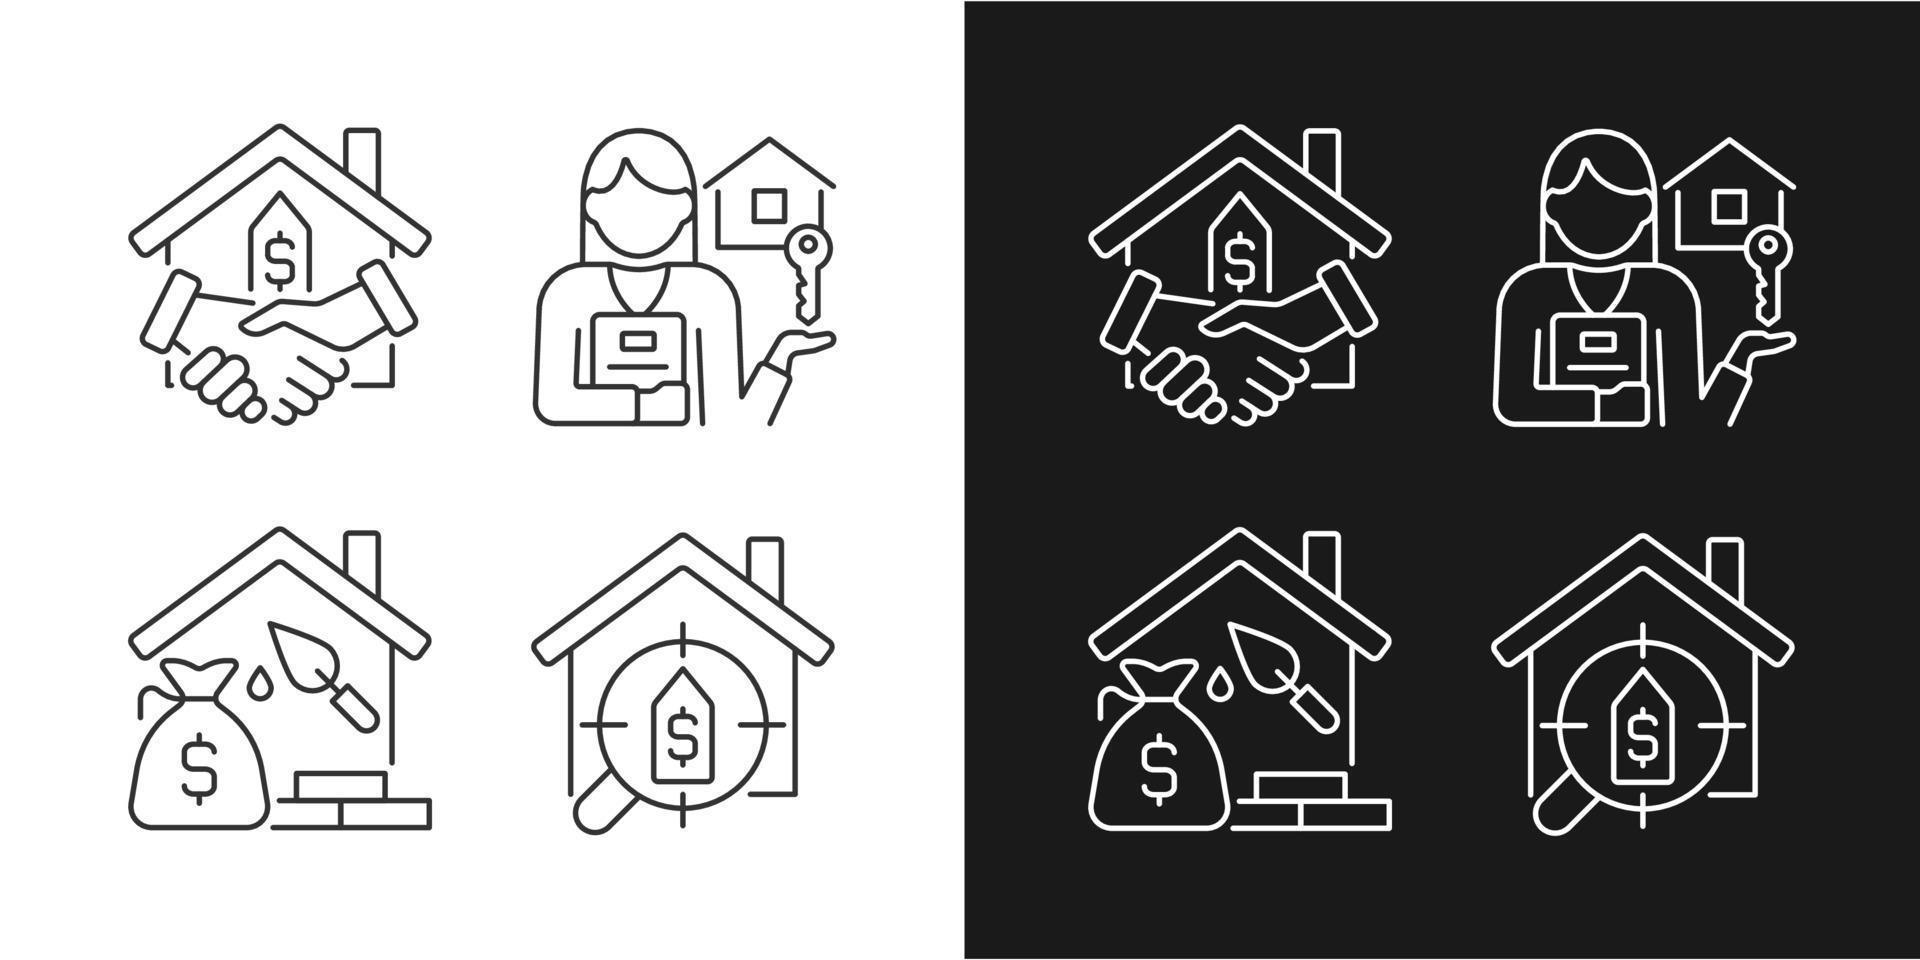 Home buying process linear icons set for dark, light mode. Real estate agent. Property mortgage. Searching house. Thin line symbols for night, day theme. Isolated illustrations. Editable stroke vector